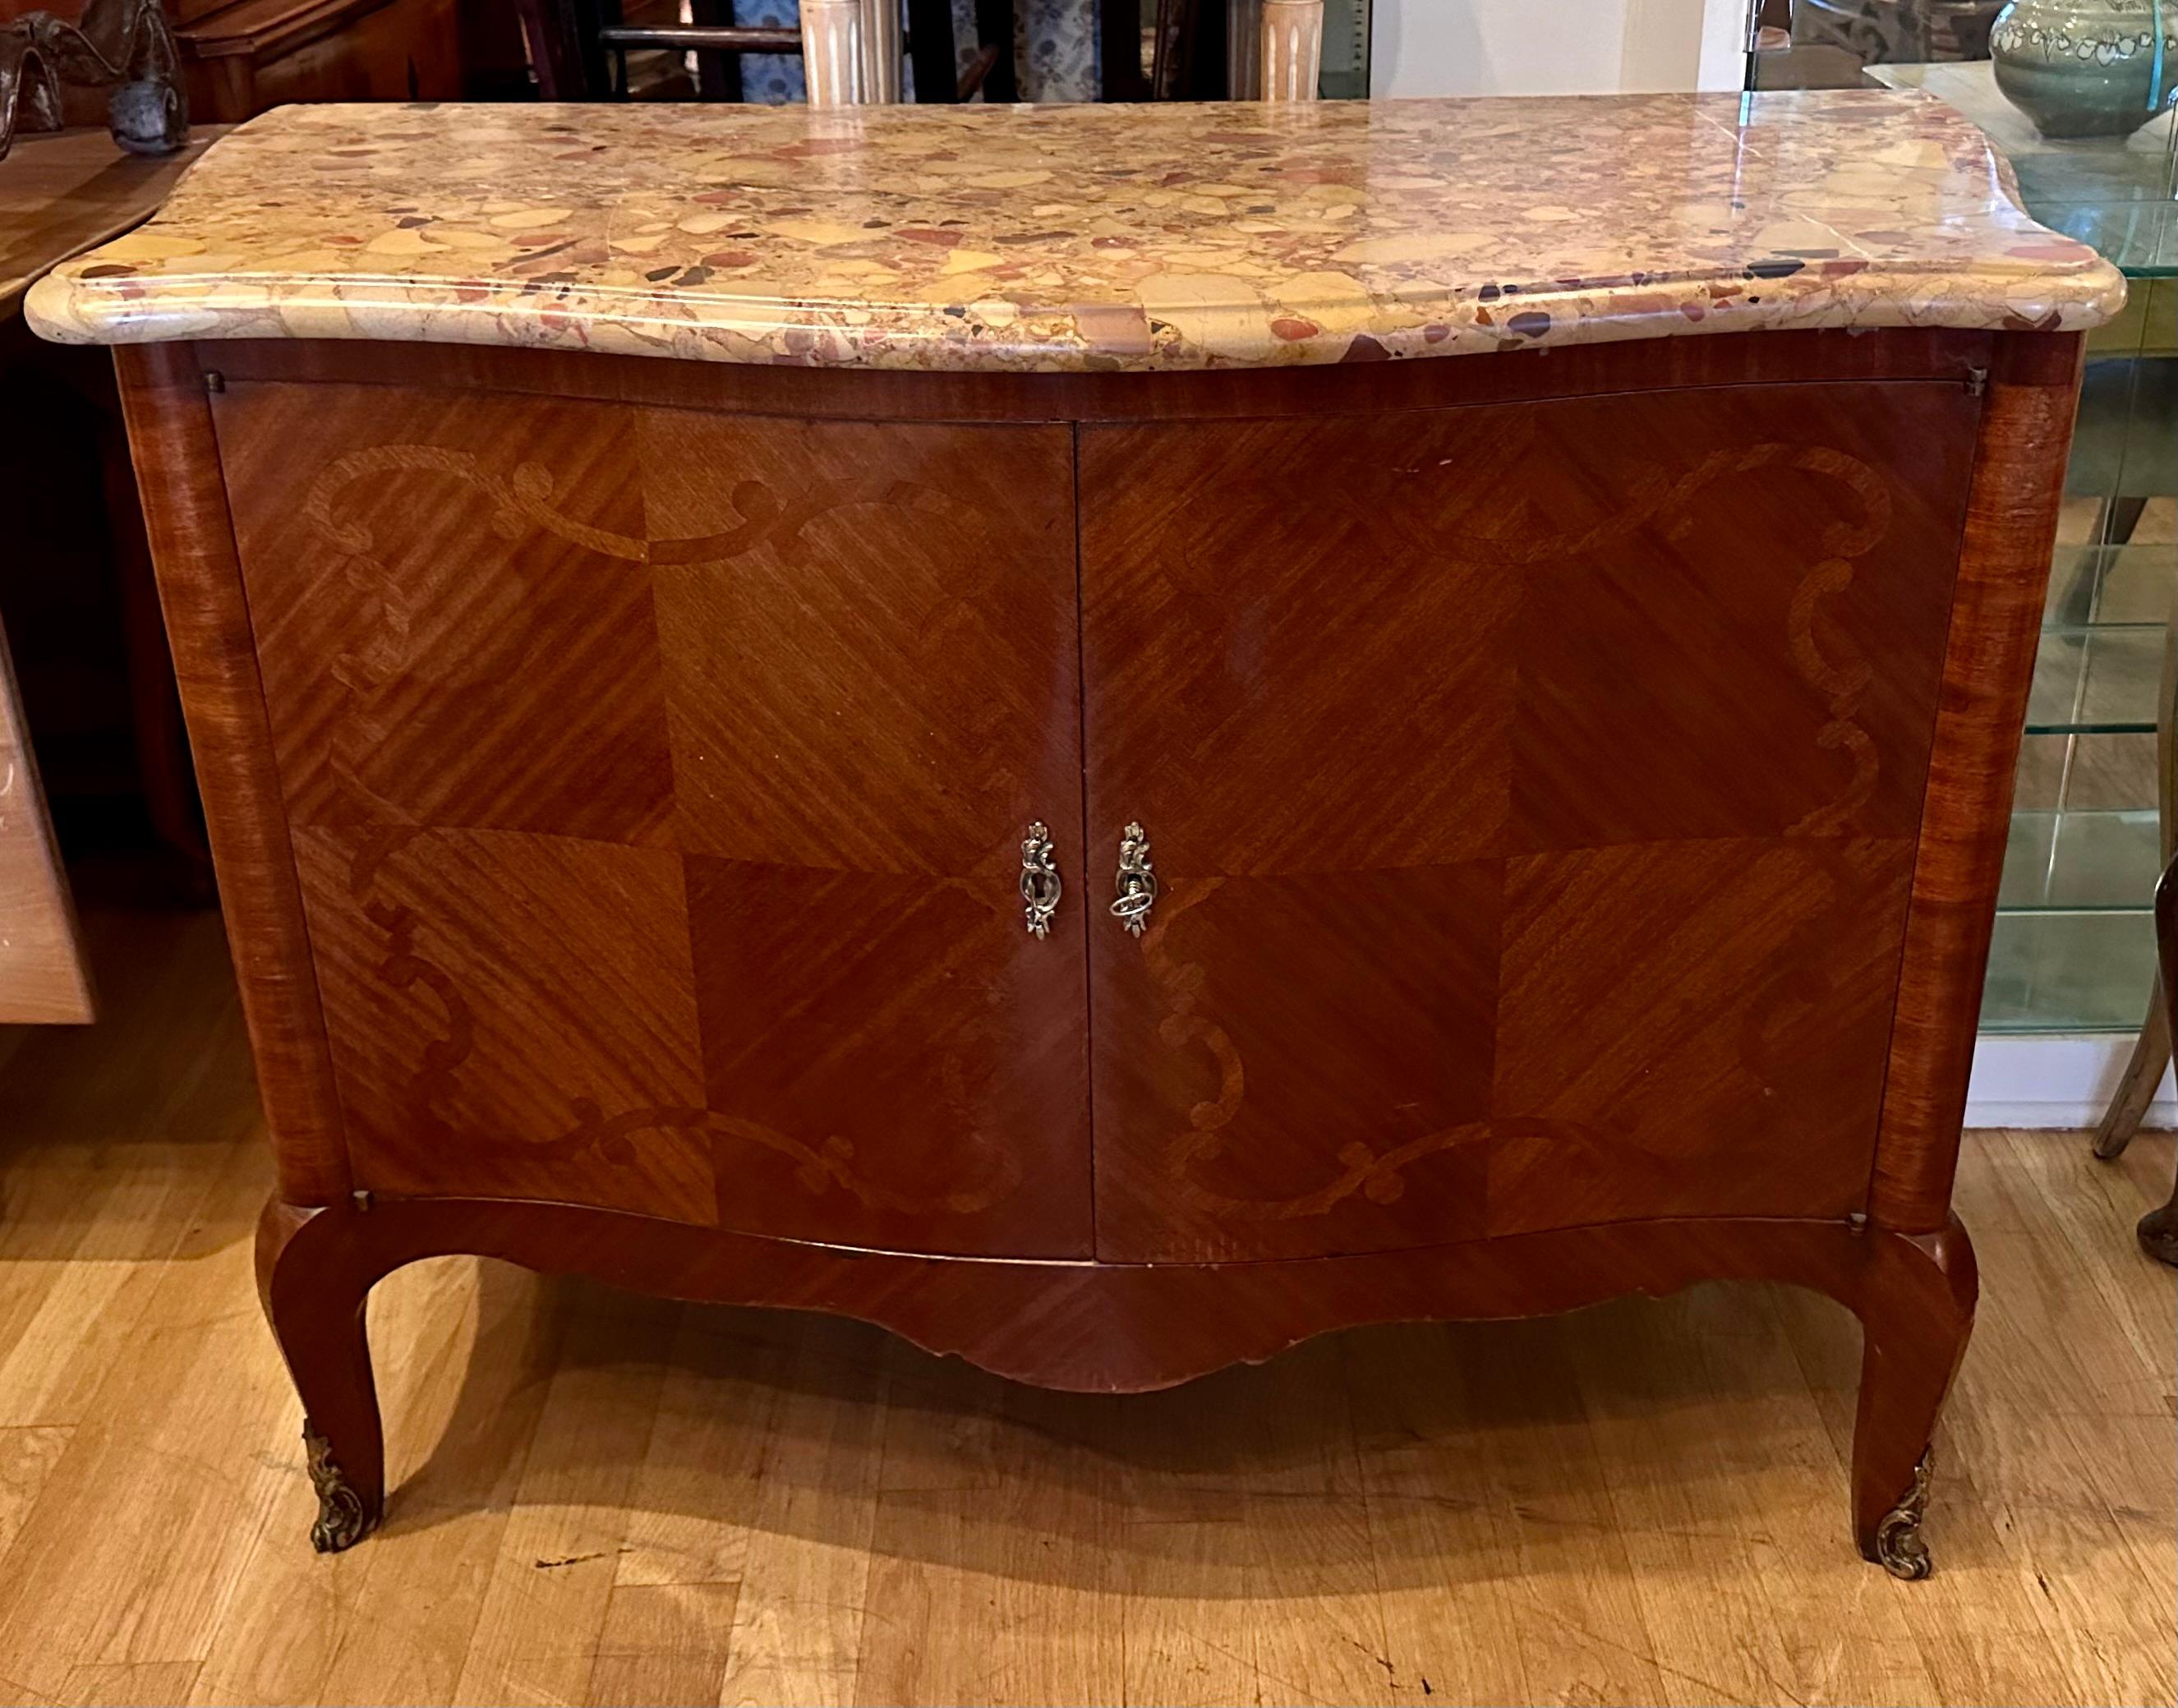 Antique French Inlaid Marble Top Credenza Sideboard by Juan Lanzani For Sale 1